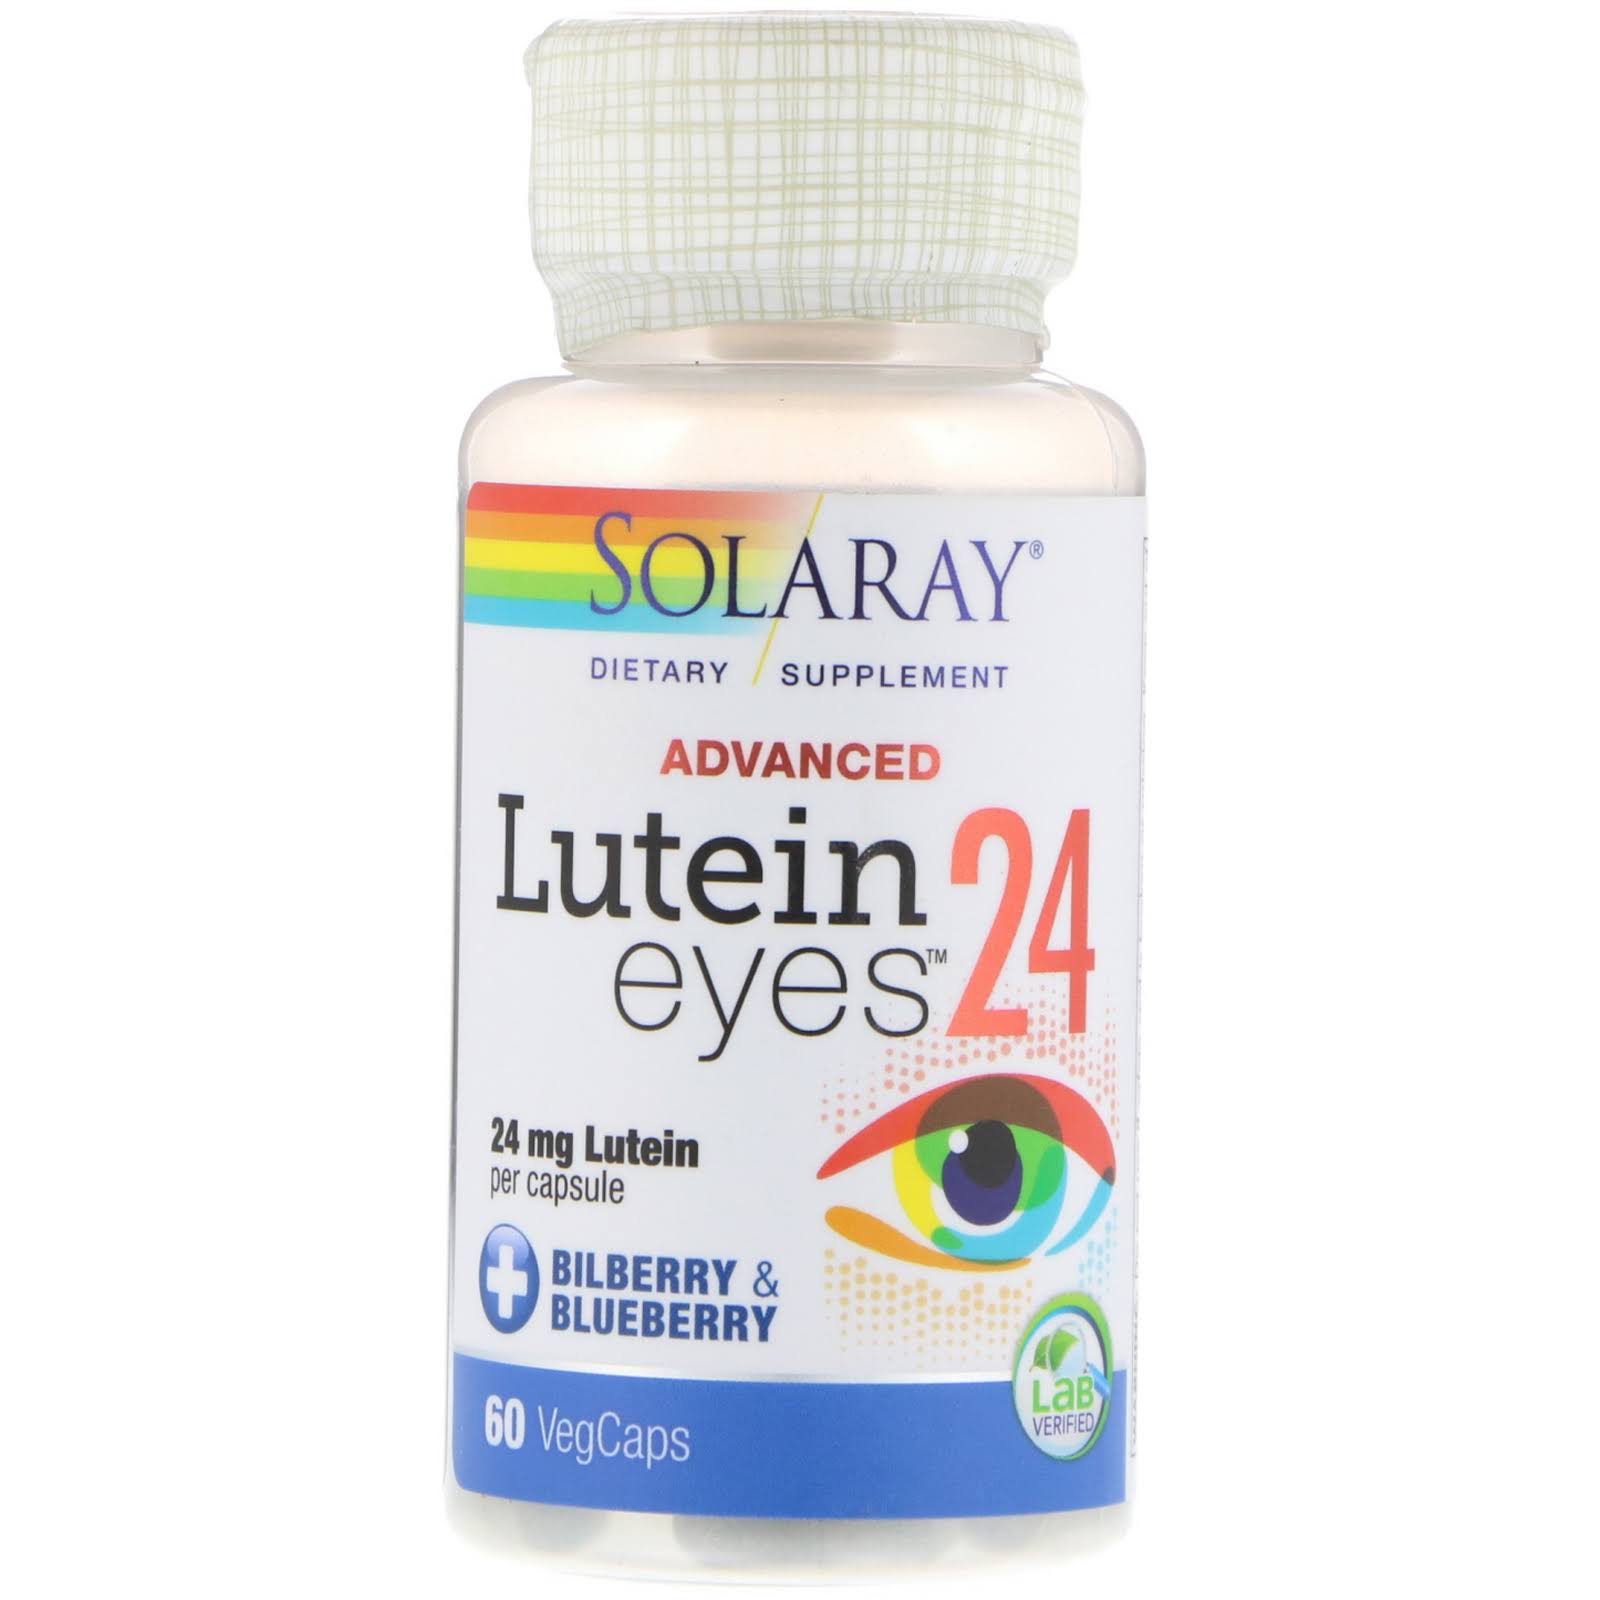 Solaray Lutein Eyes Advanced 24mg Dietary Supplement - 60 Capsules